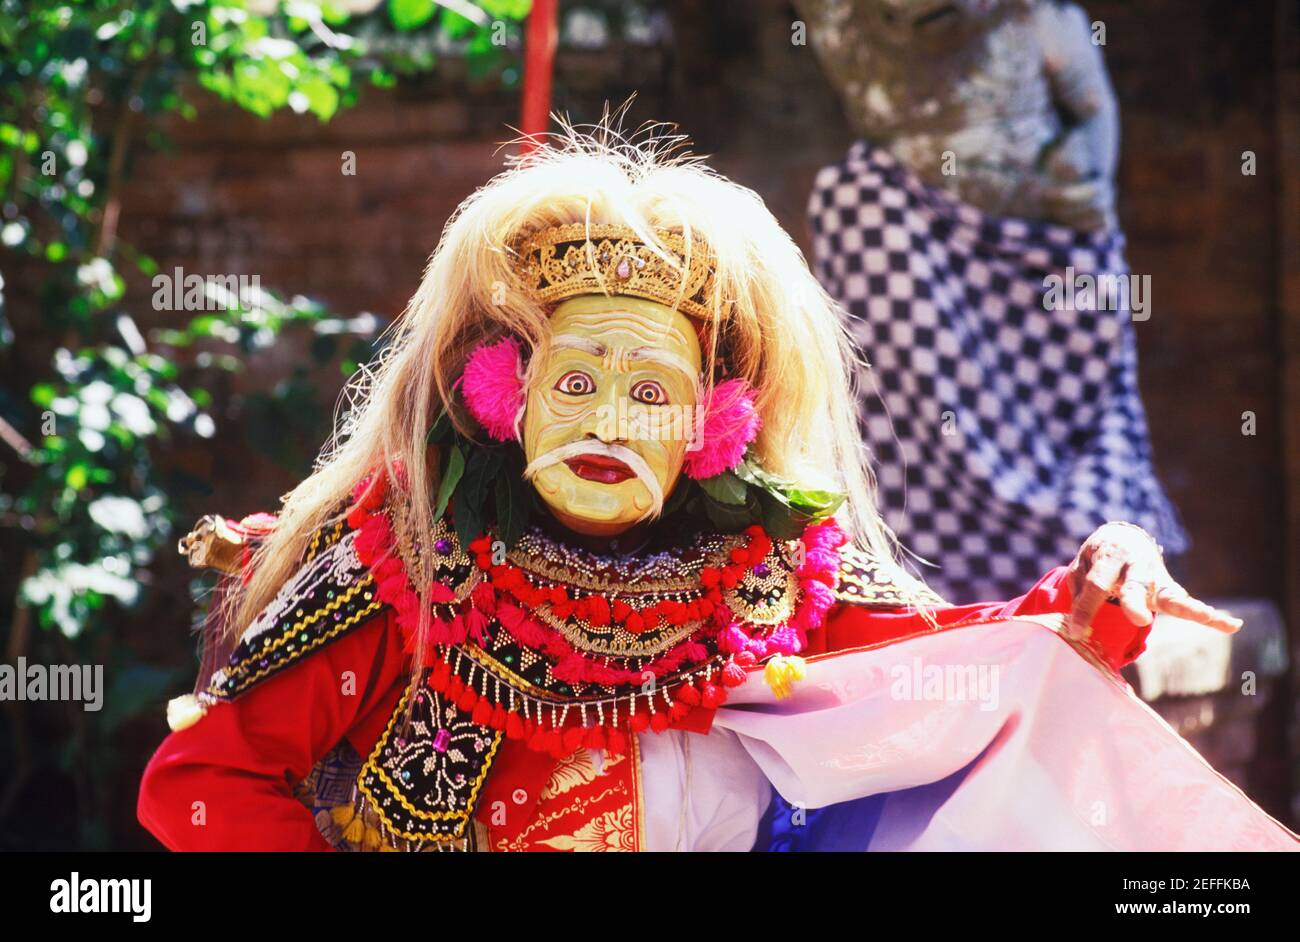 Close-up of a stage performer dancing, Bali, Indonesia Stock Photo